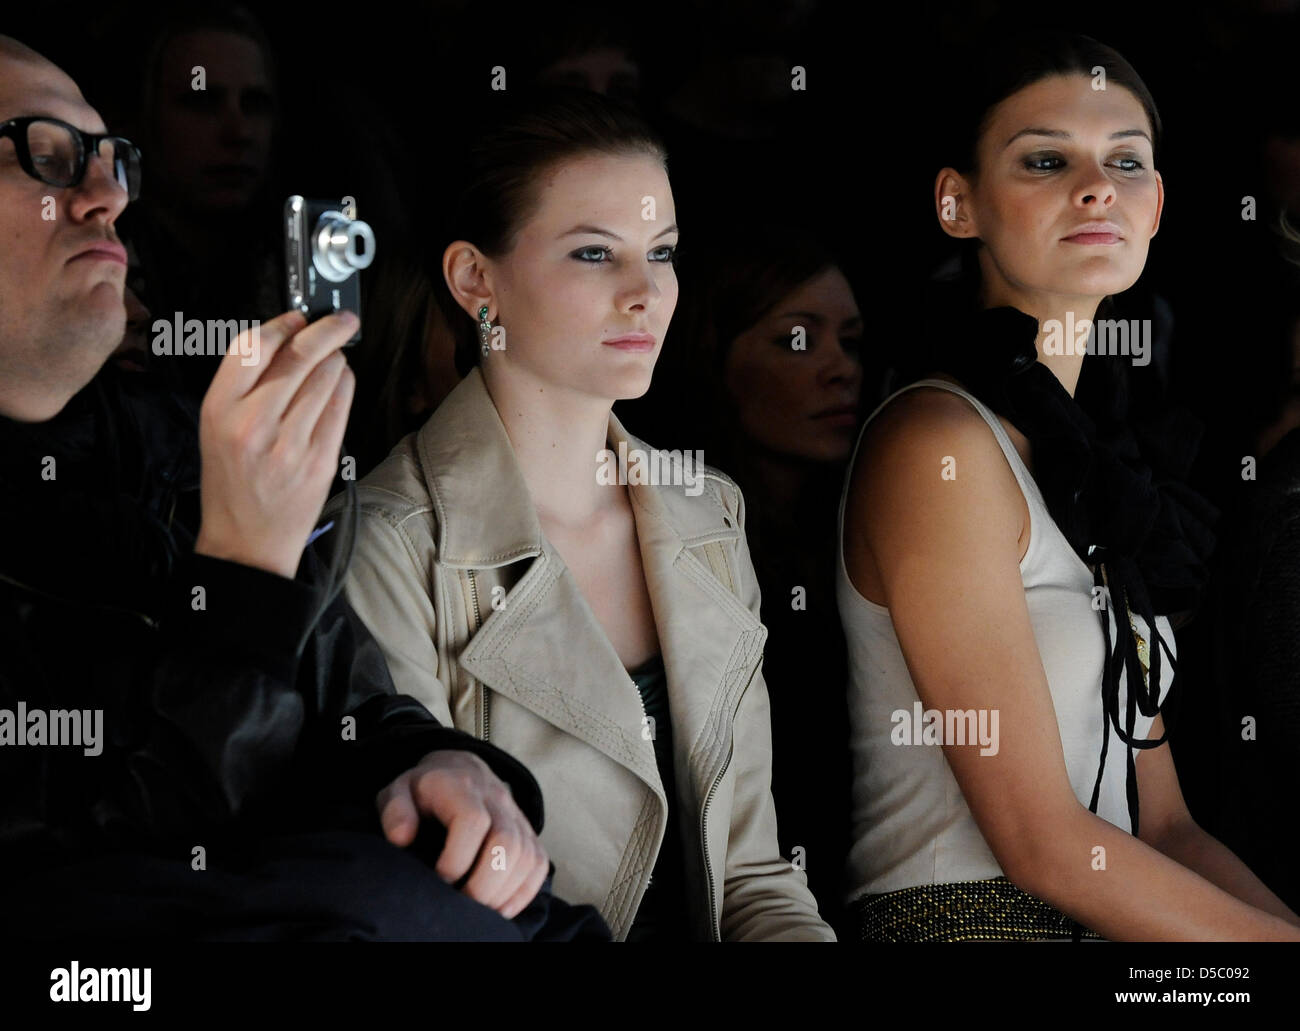 Models Jennifer Hof (L) and Janina Delia Schmidt (3-L) are at the show of the label 'Stefan Eckert' at the Mercedes-Benz Fashion Week in Berlin, Germany, 22 January 2010. The Mercedes-Benz Fashion Week takes place within the scope of the Berlin Fashion Week, autumn/winter 2010-11 fashion trends are presented until 23 January 2010. Photo: BRITTA PEDERSEN Stock Photo